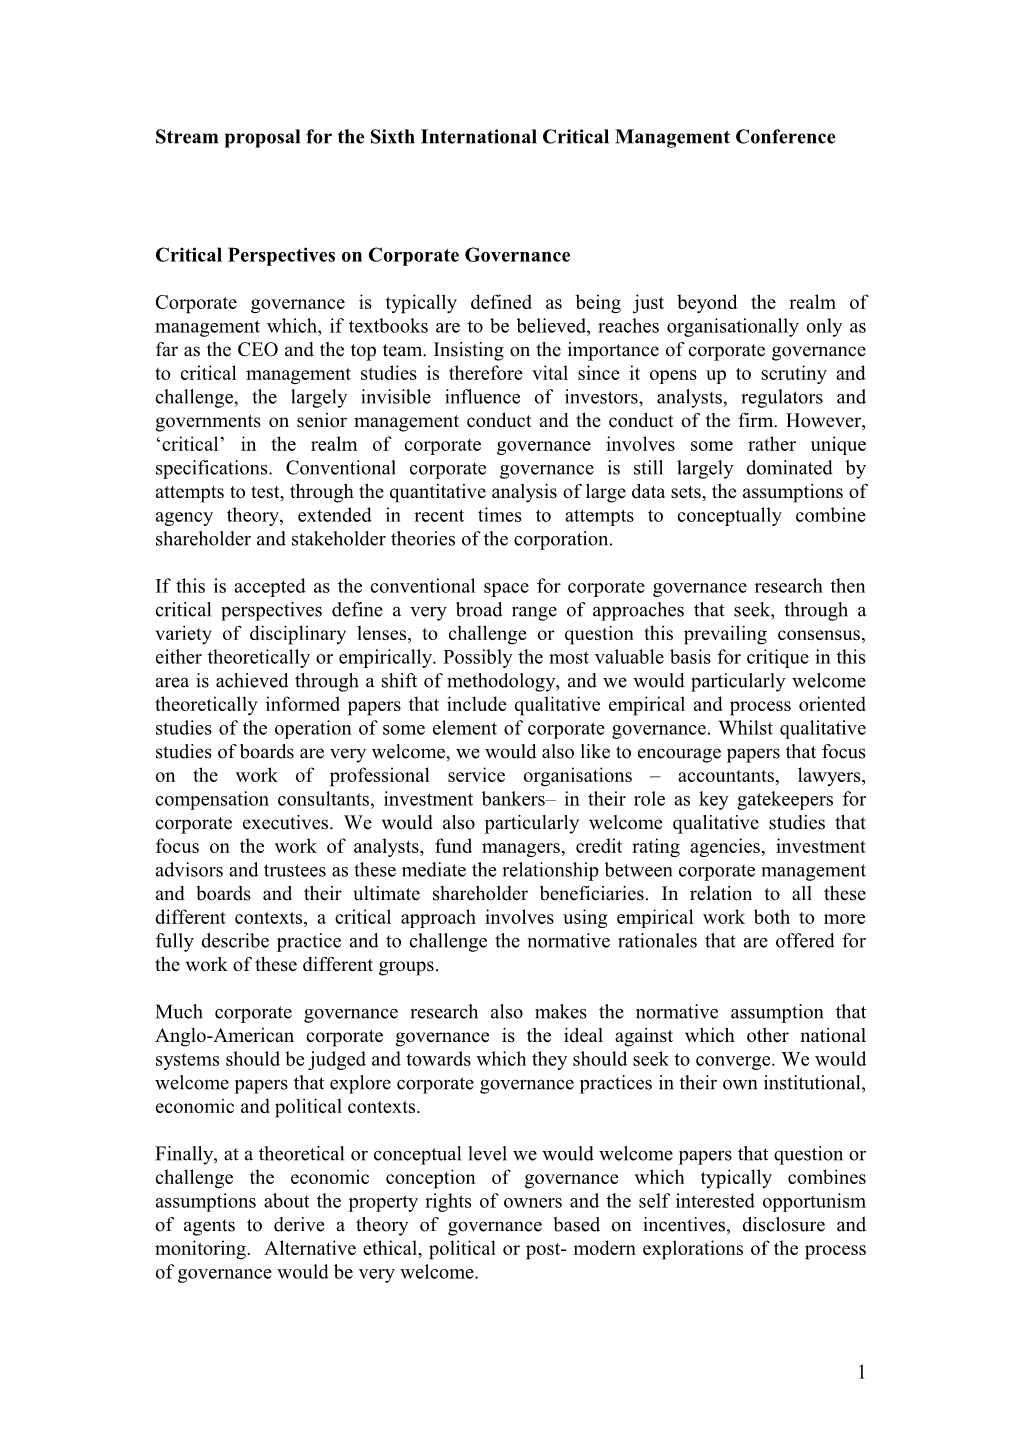 Critical Perspectives on Corporate Governance